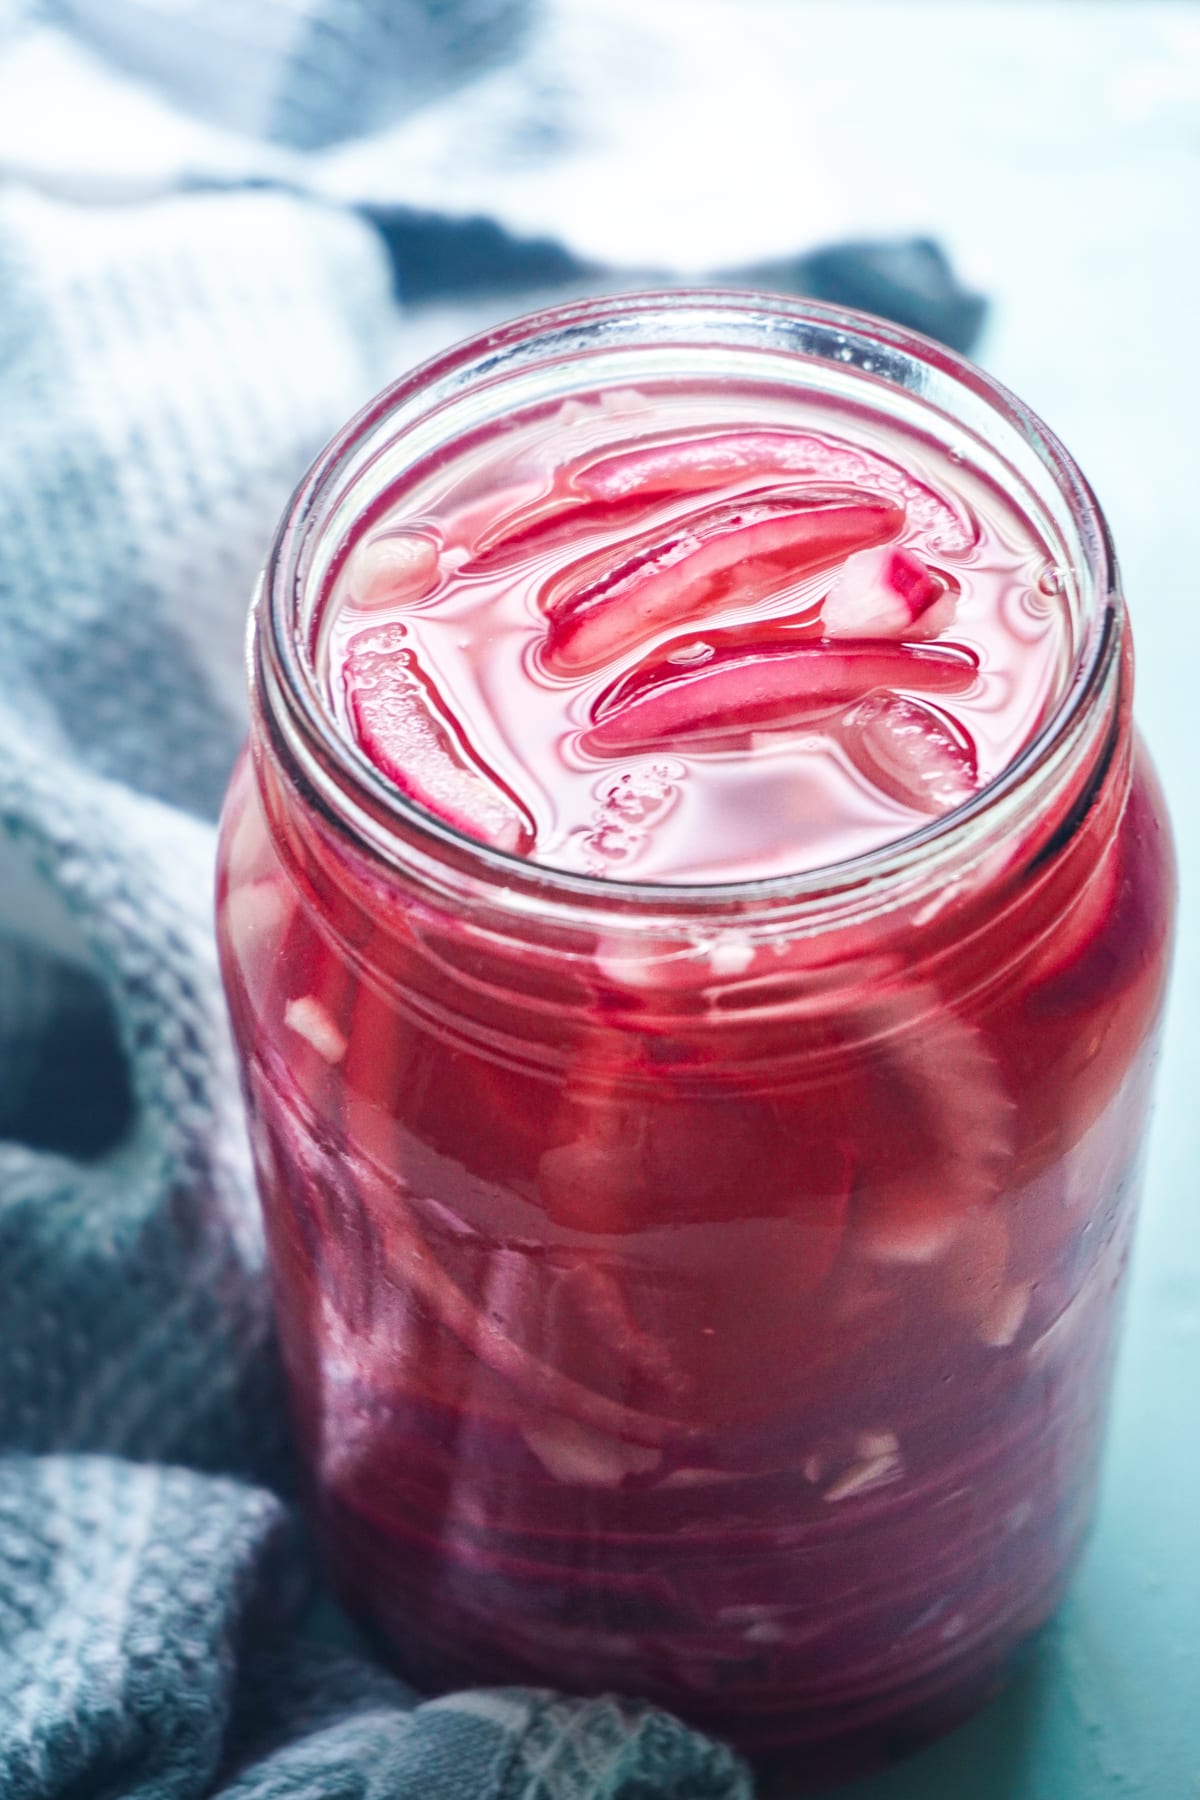 pickled red onions in a glass jar
